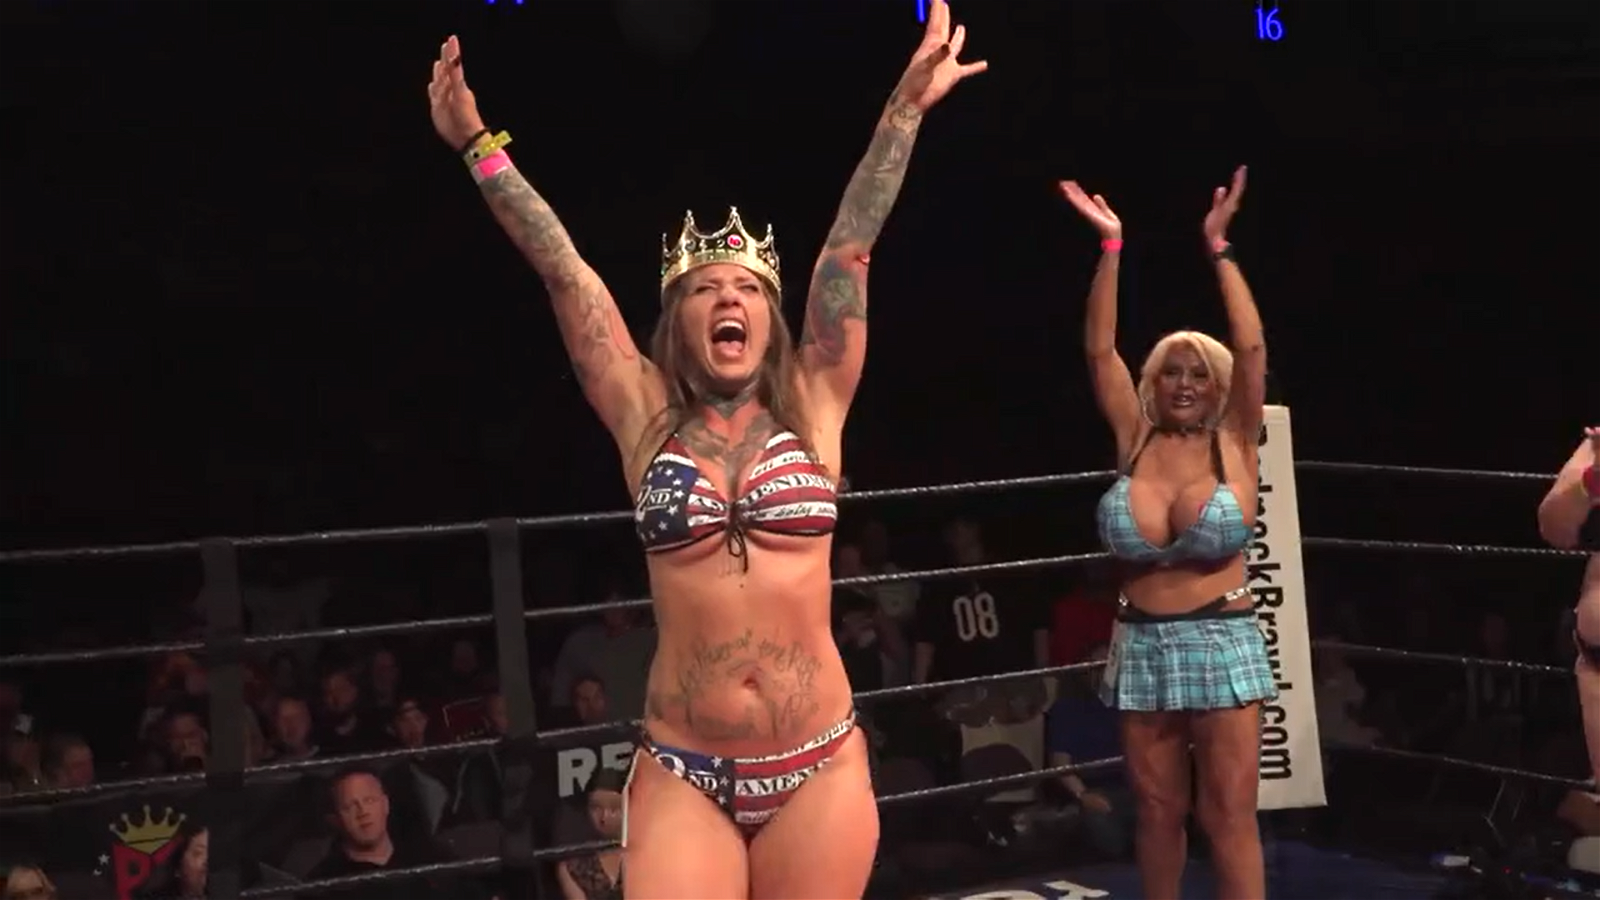 Tiffany “Conspiracy Smokeshow” Baxter won a fight and the ring card girl contest tonight at Redneck Brawl 6